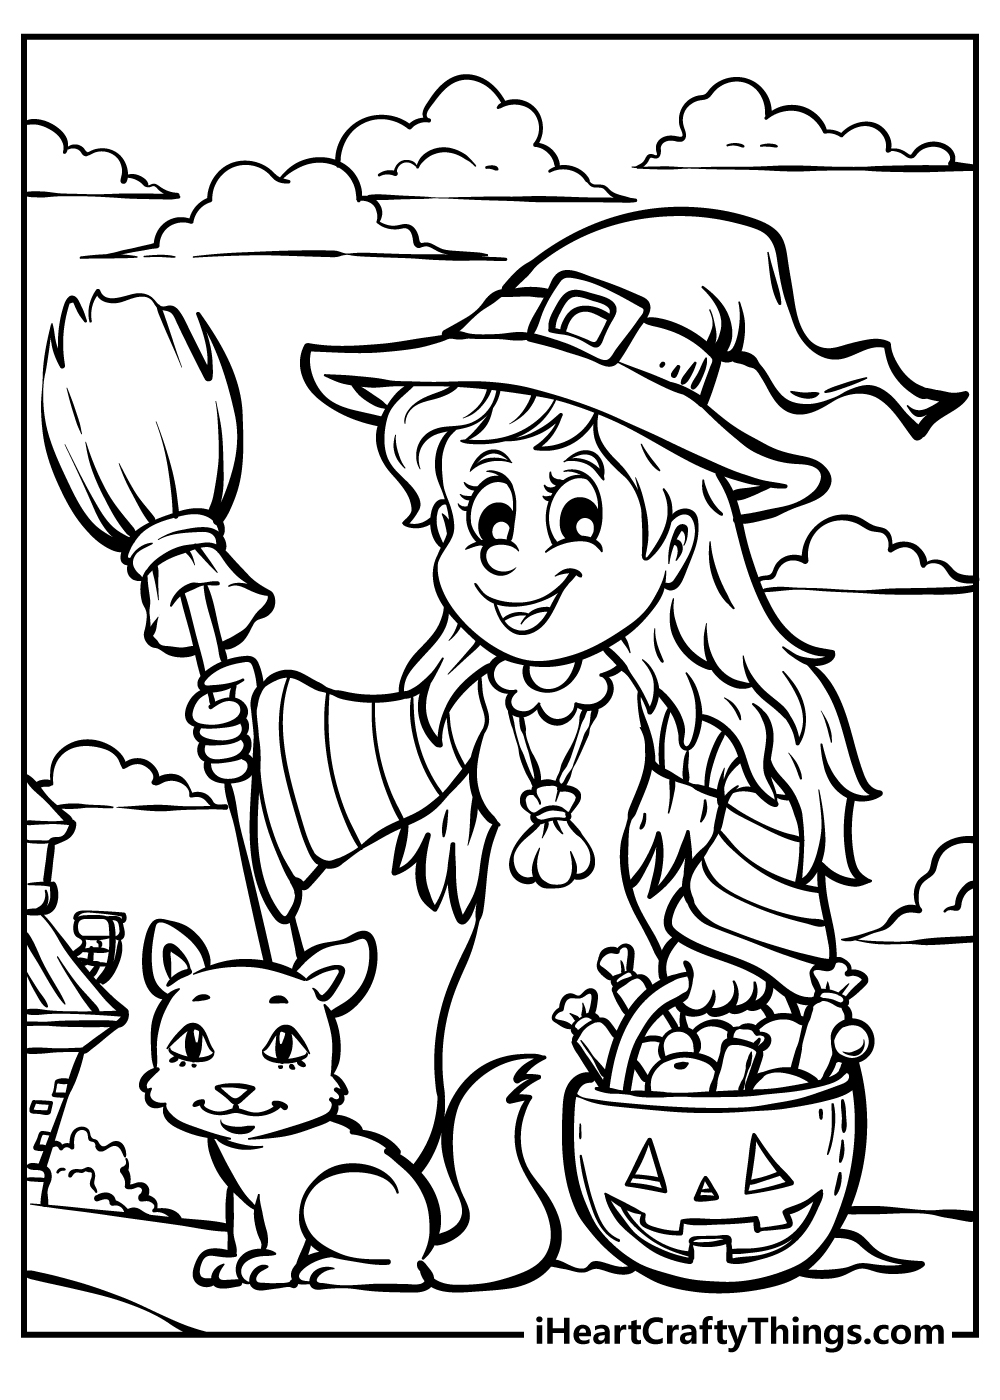 Halloween Coloring Pages free pdf download